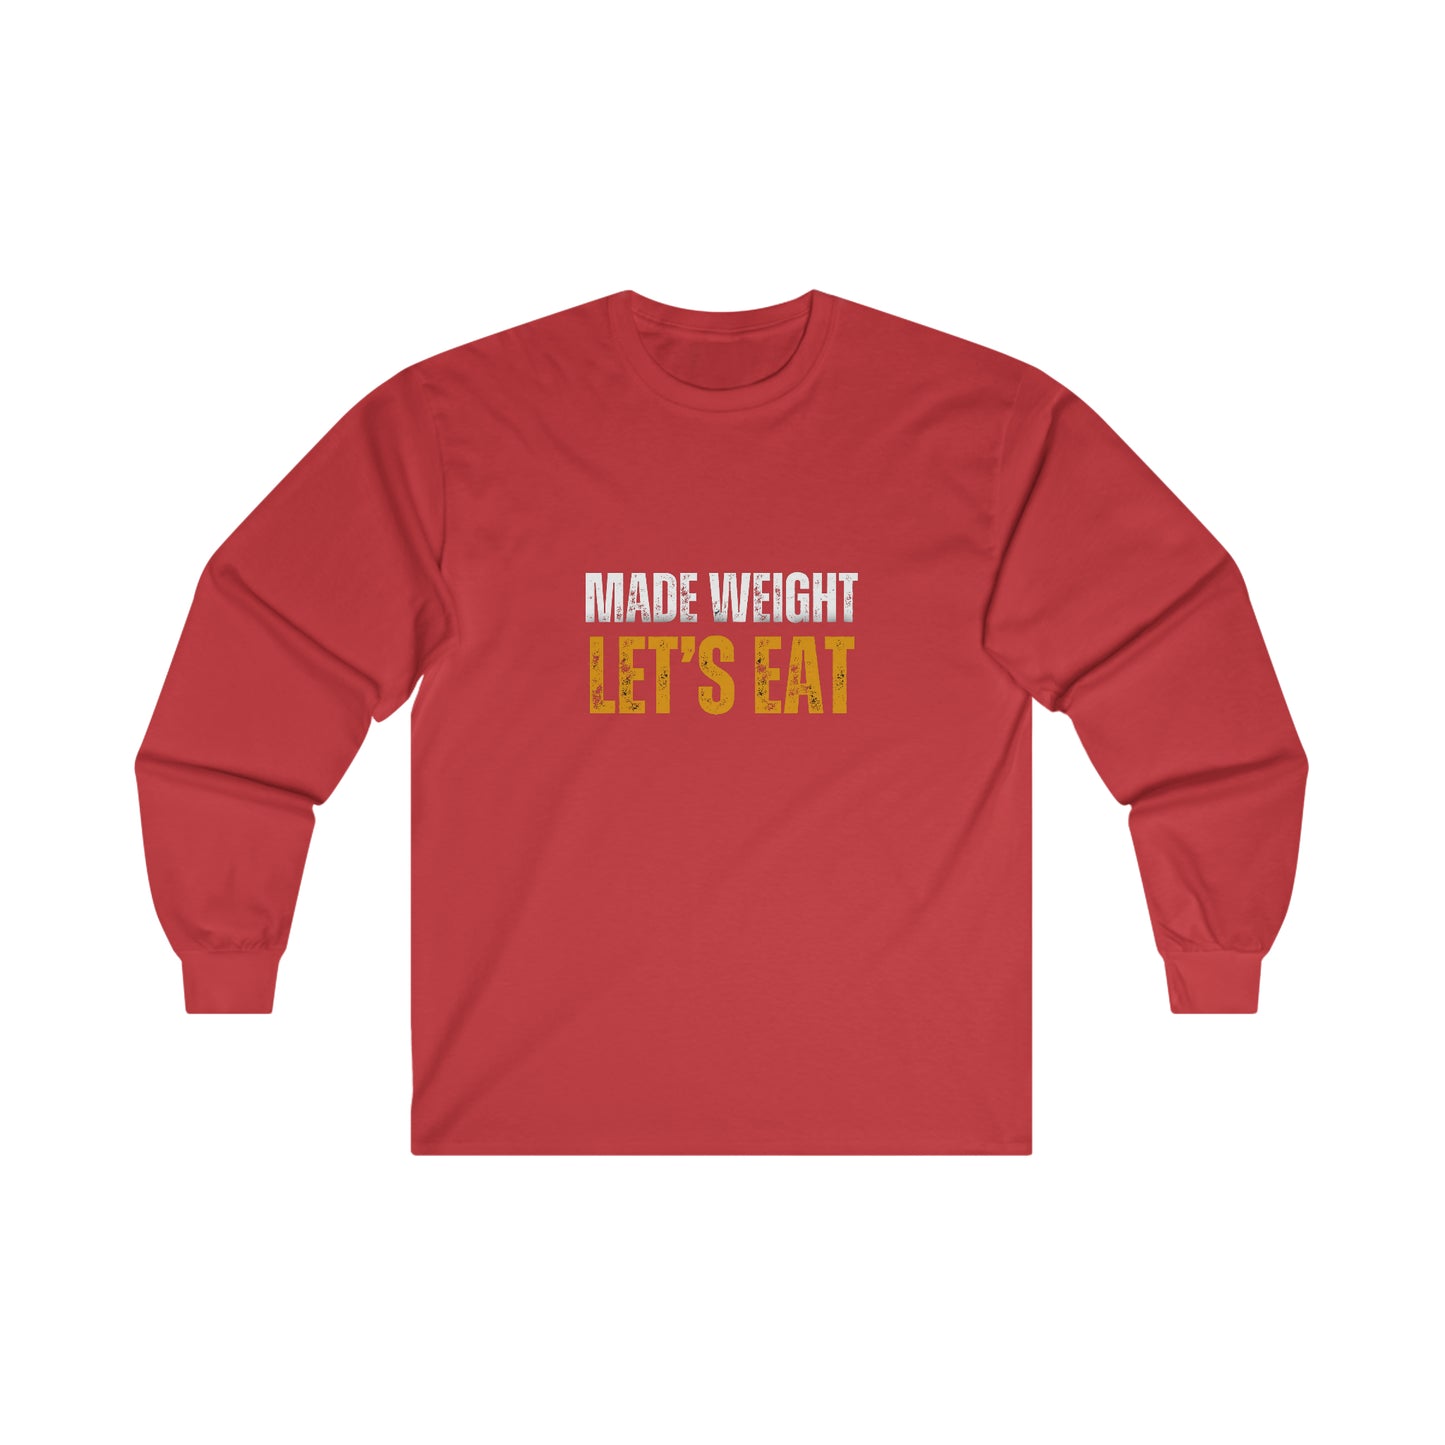 Made Weight, Lets Eat- Long Sleeve Tee